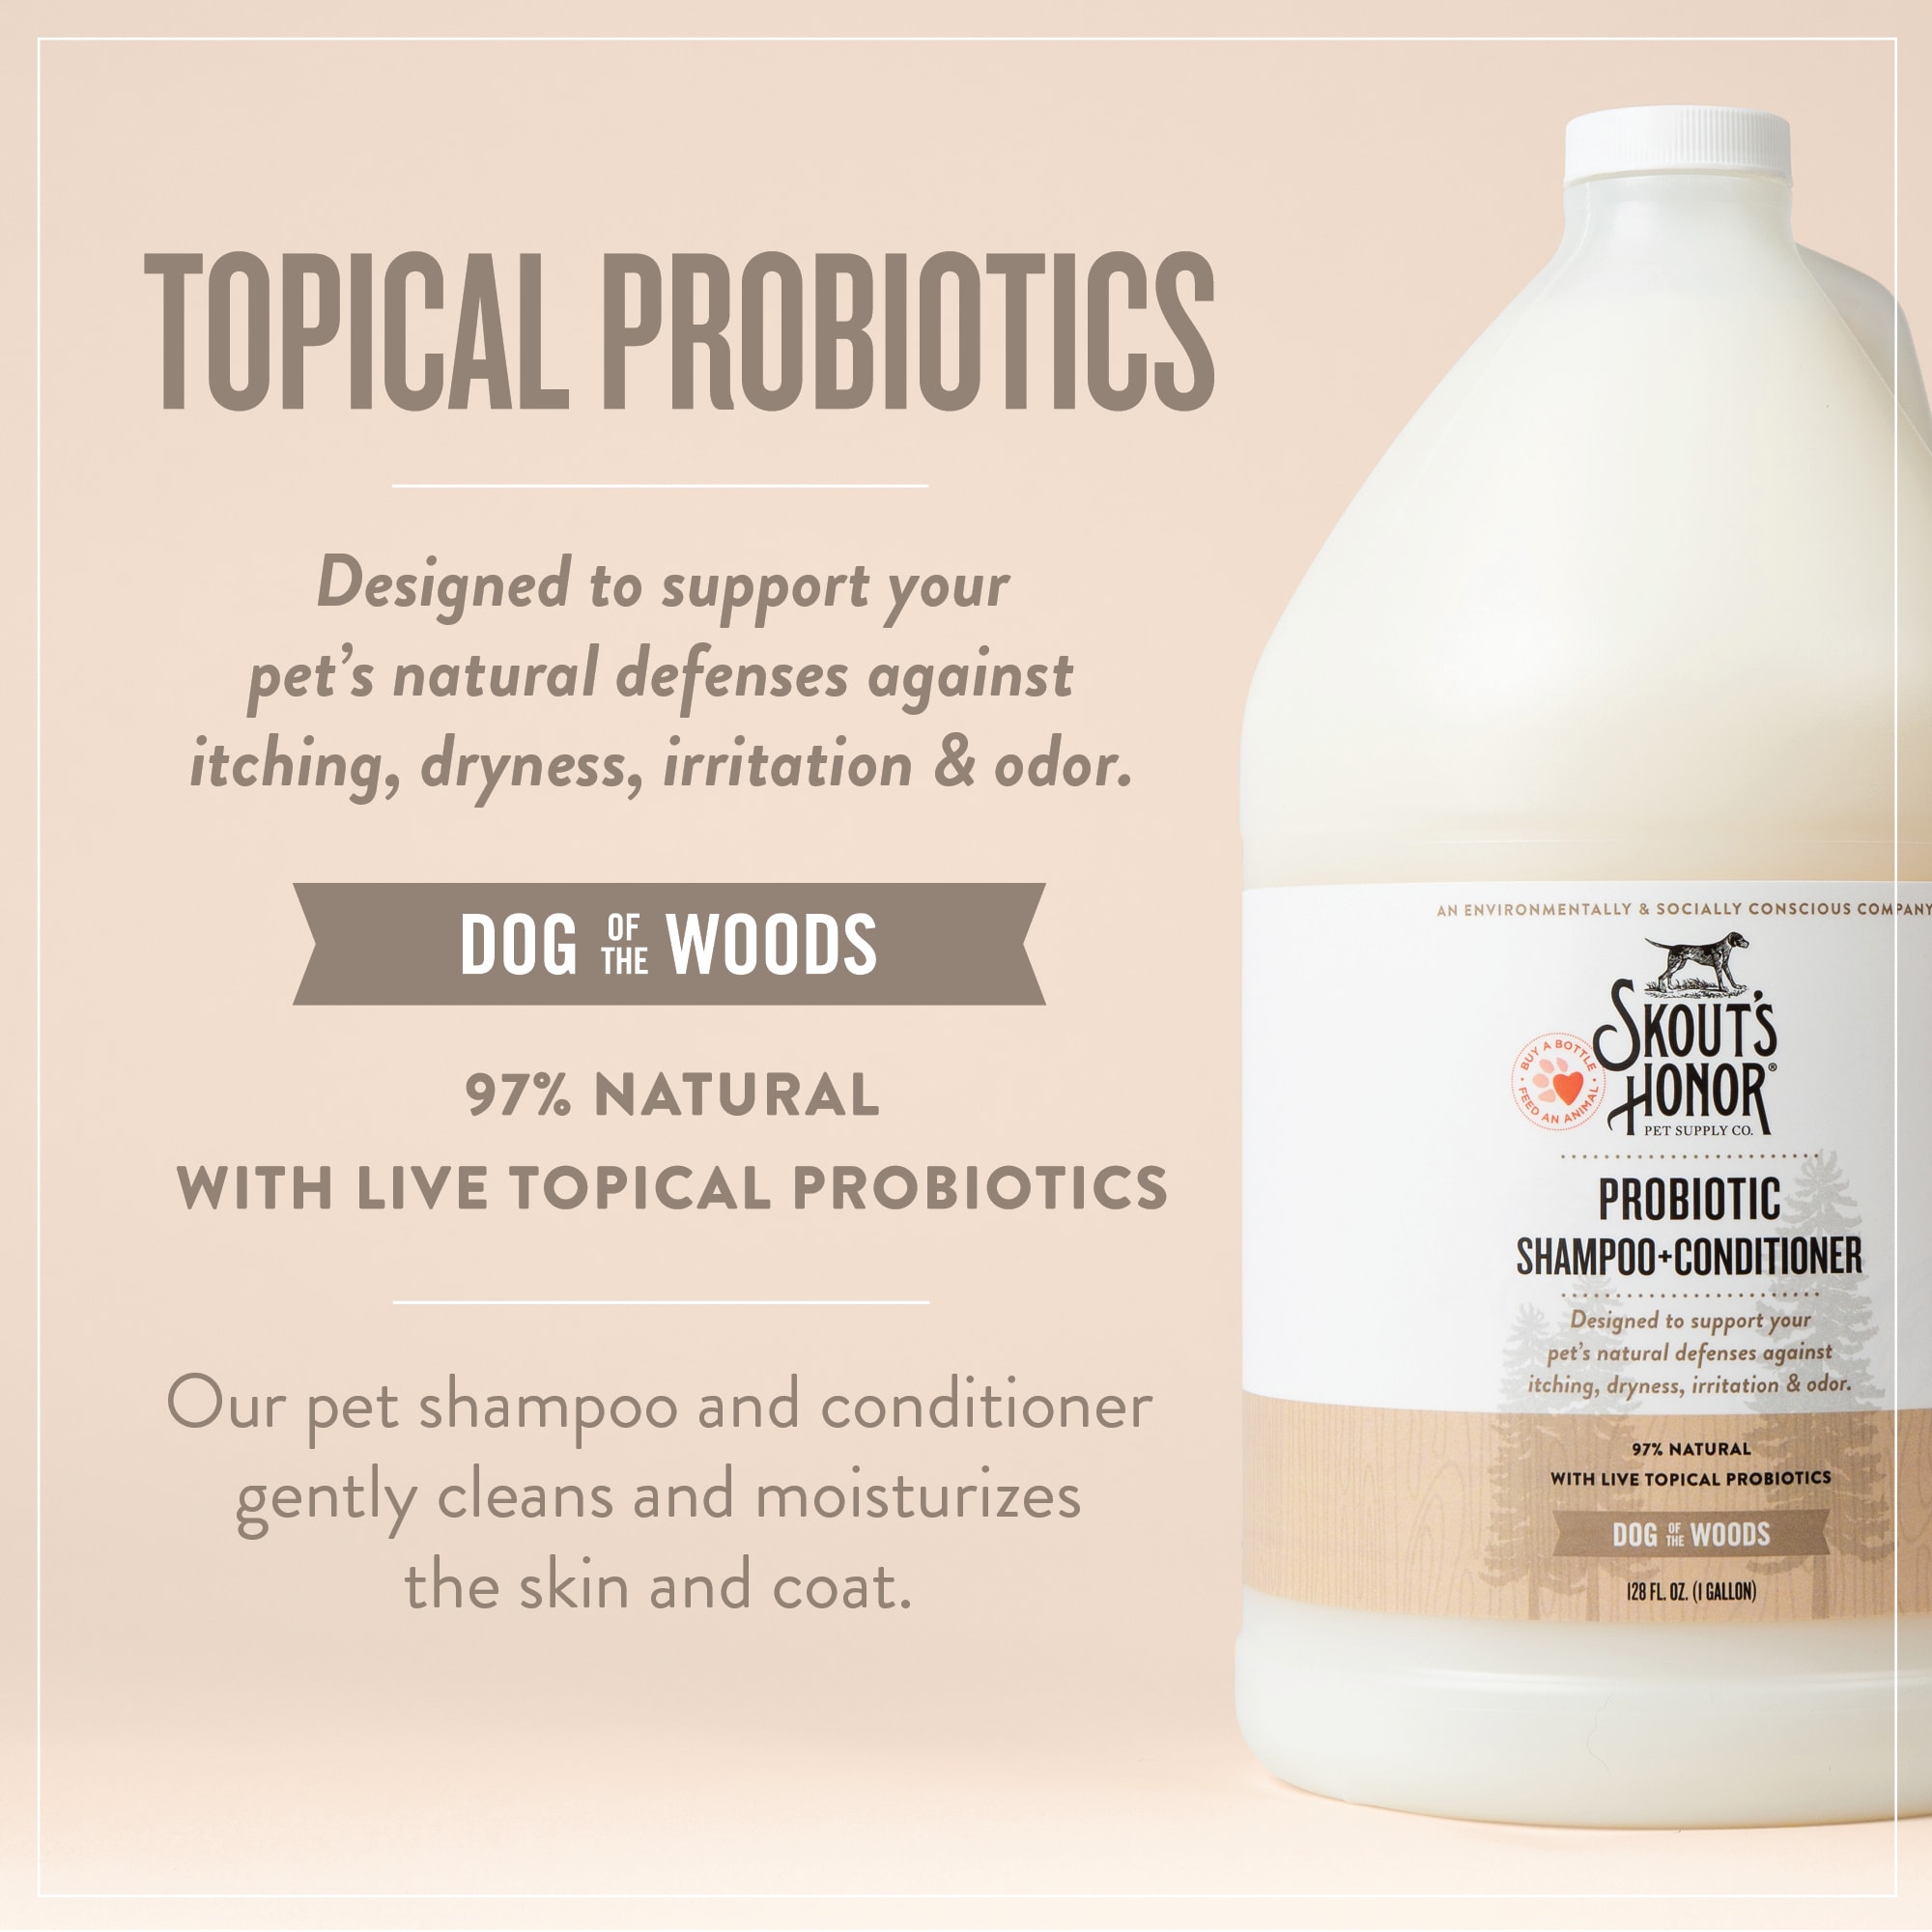 Probiotic Shampoo & Conditioner For Dogs & Cats - Skout's Honor